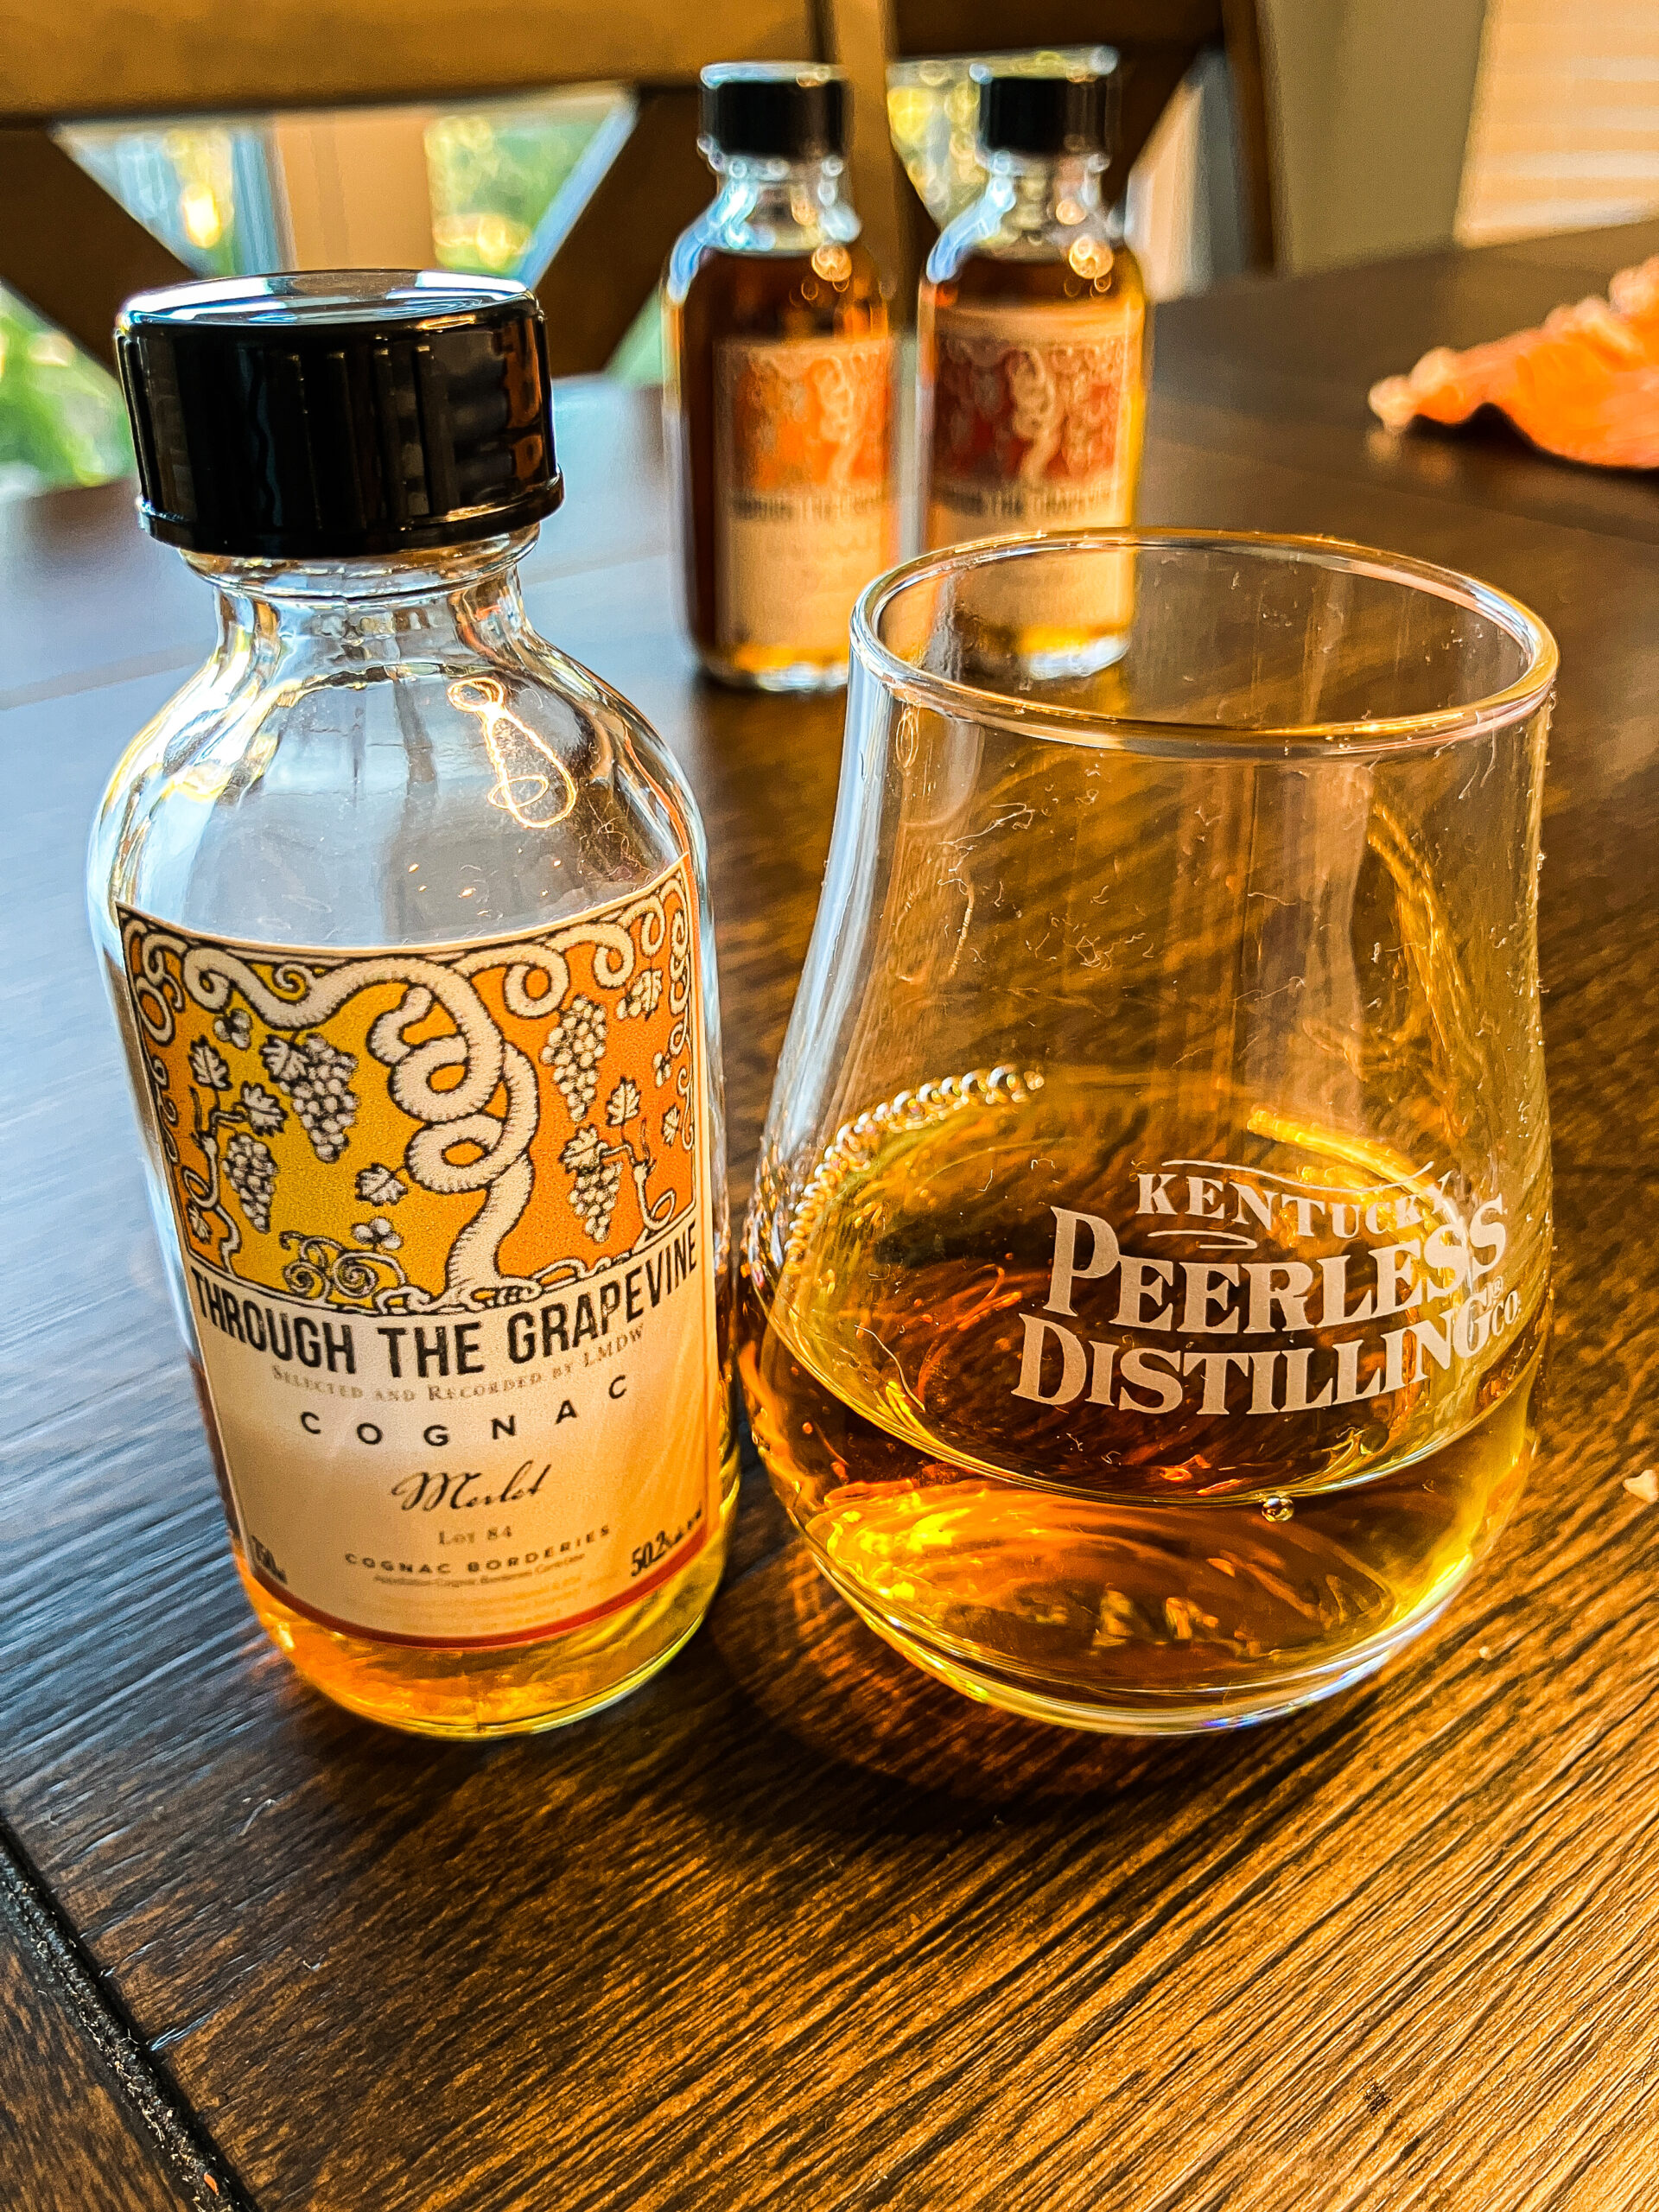 Review #562 – Through The Grapevine: Borderies Merlet Lot 84